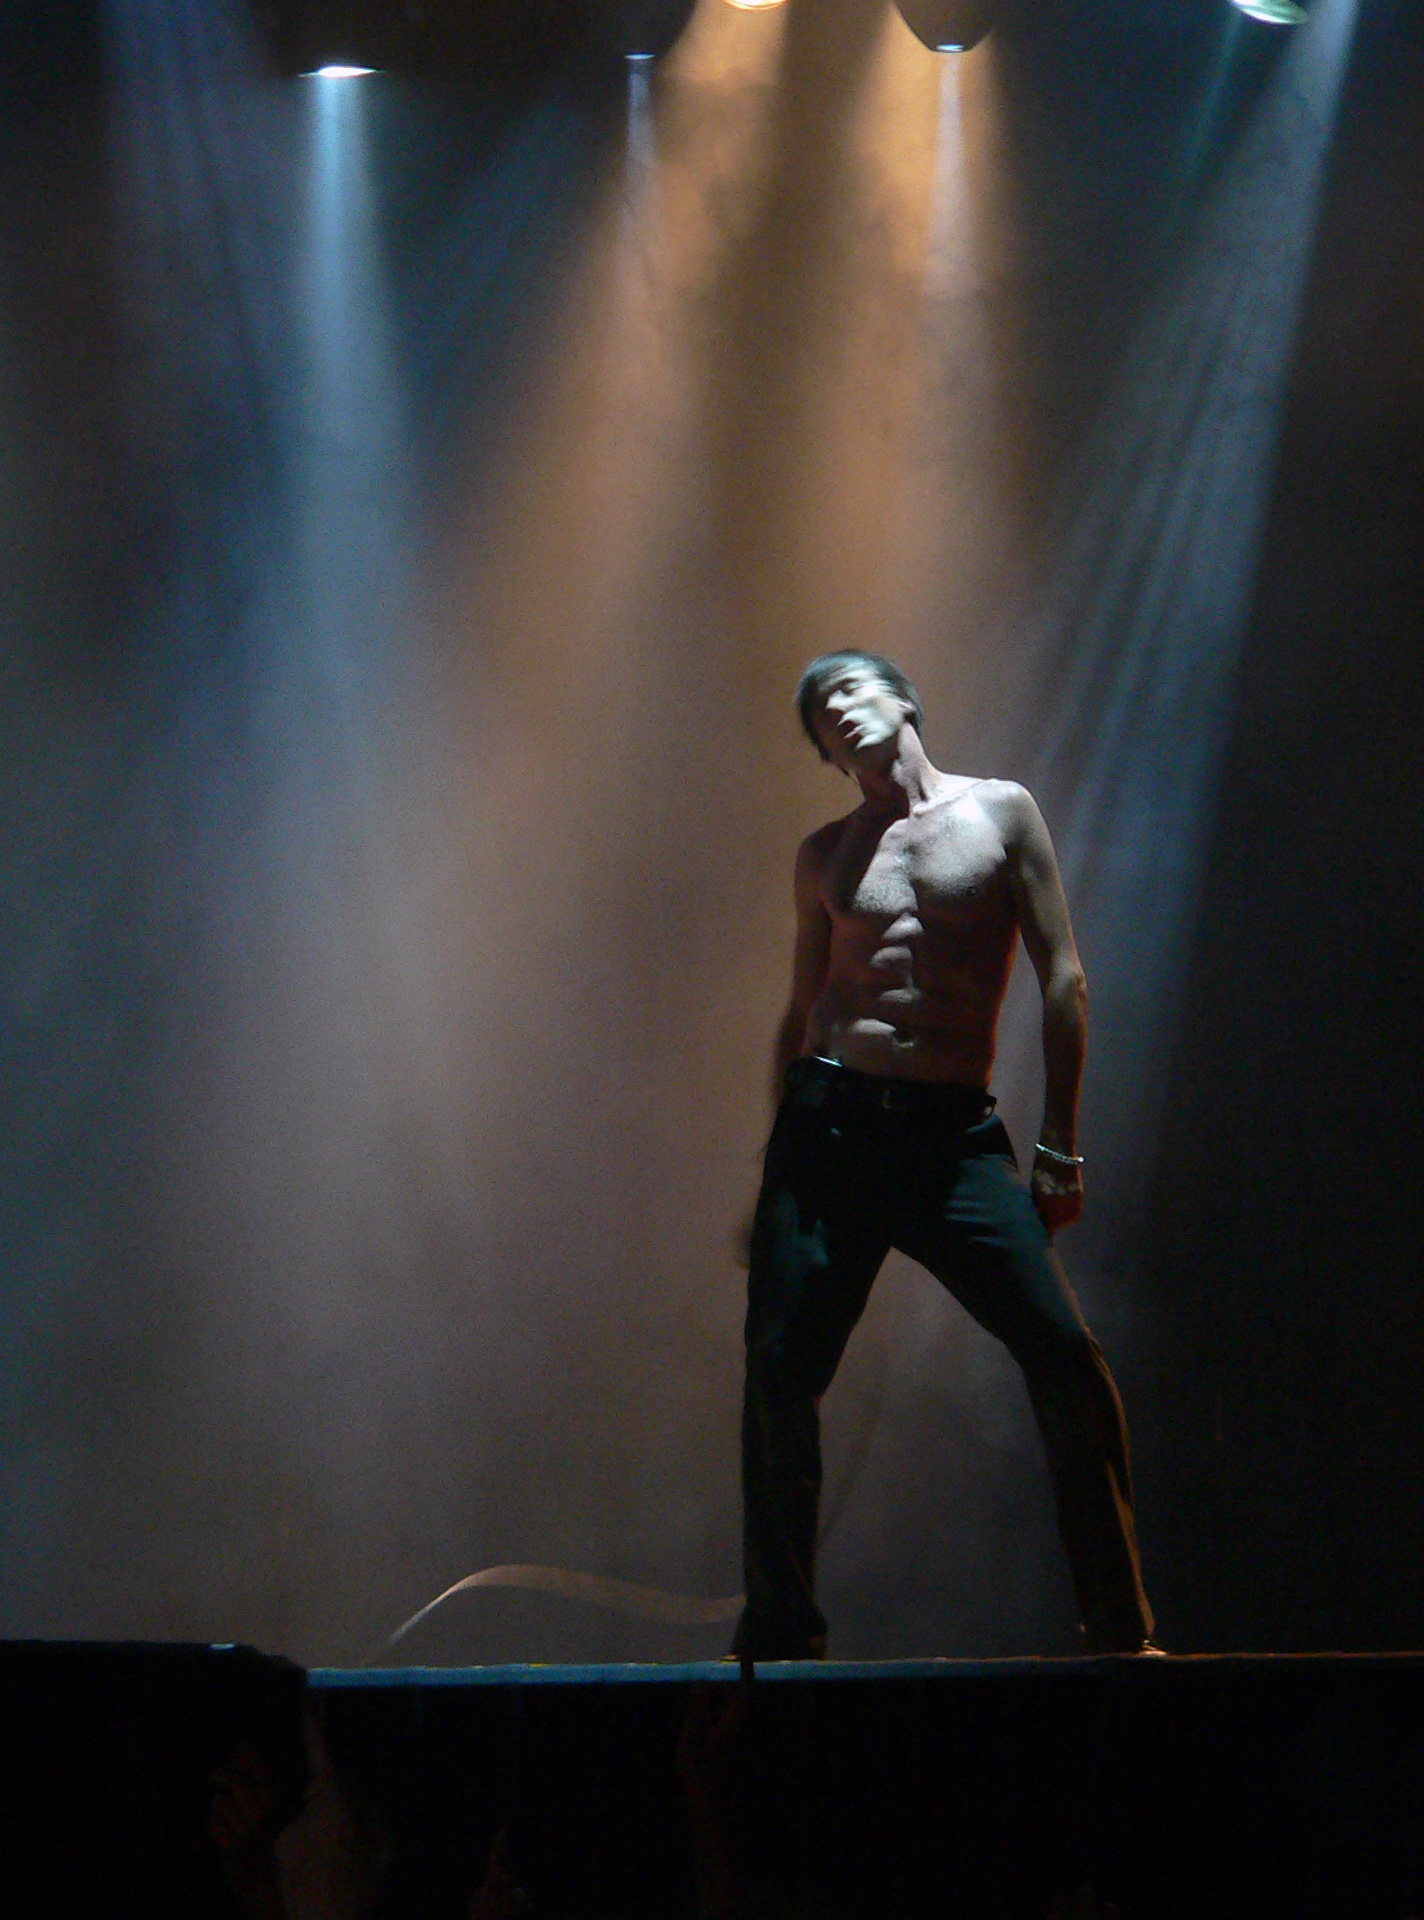 shirtless man stands on stage with light beams